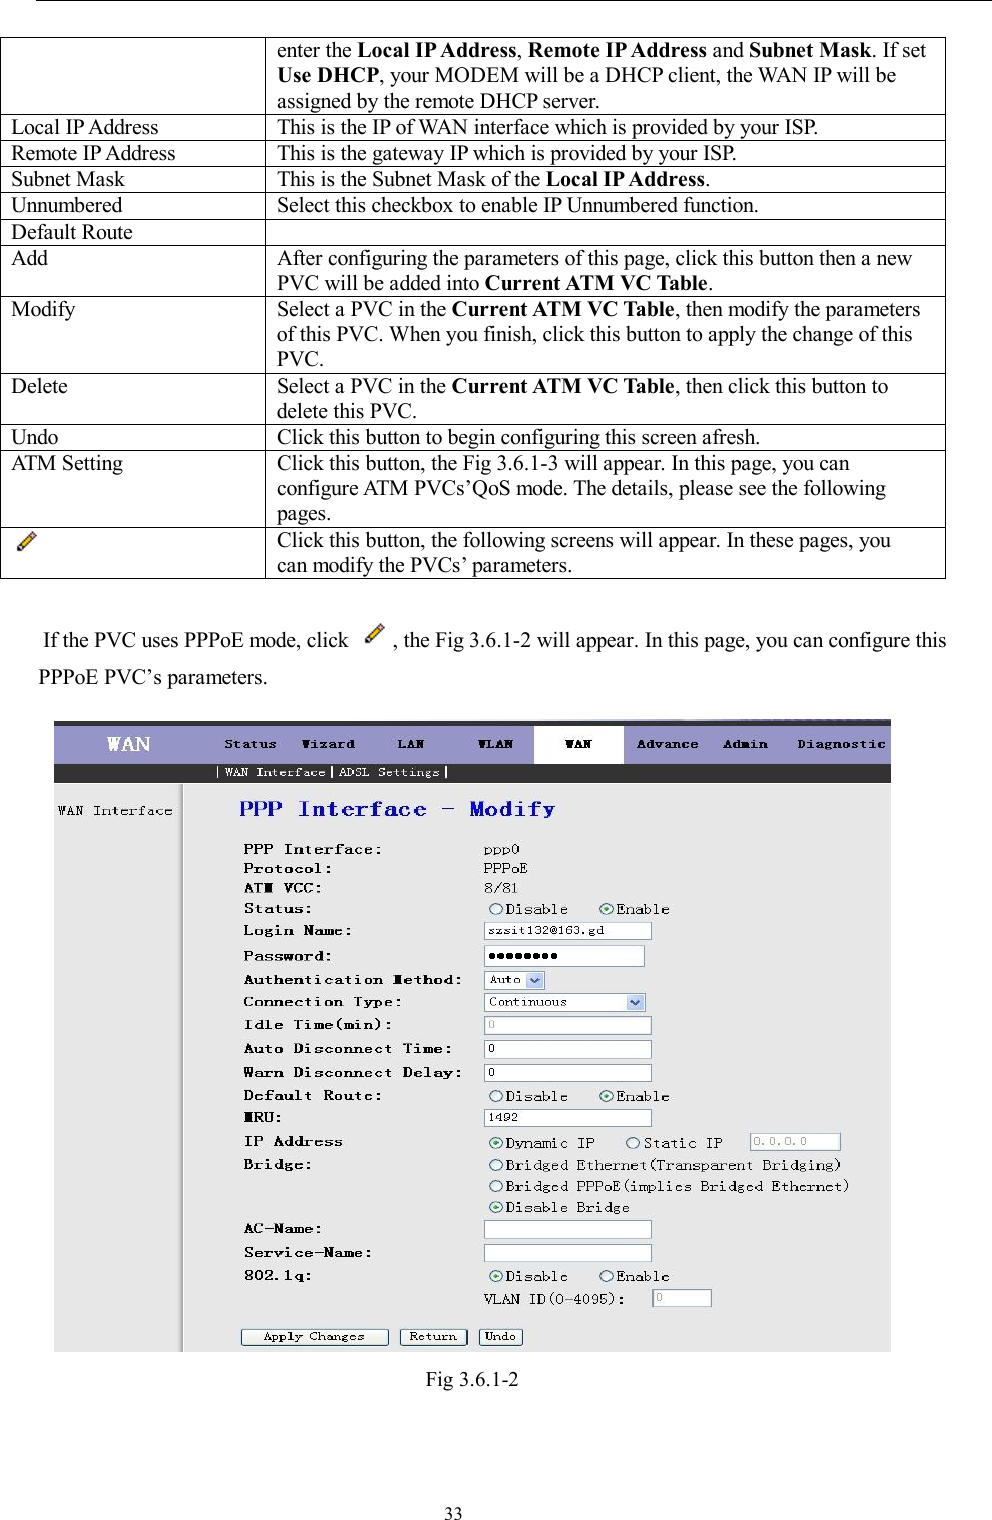                                                                     33 enter the Local IP Address, Remote IP Address and Subnet Mask. If set Use DHCP, your MODEM will be a DHCP client, the WAN IP will be assigned by the remote DHCP server. Local IP Address  This is the IP of WAN interface which is provided by your ISP. Remote IP Address  This is the gateway IP which is provided by your ISP. Subnet Mask  This is the Subnet Mask of the Local IP Address. Unnumbered  Select this checkbox to enable IP Unnumbered function.  Default Route   Add  After configuring the parameters of this page, click this button then a new PVC will be added into Current ATM VC Table. Modify  Select a PVC in the Current ATM VC Table, then modify the parameters of this PVC. When you finish, click this button to apply the change of this PVC. Delete  Select a PVC in the Current ATM VC Table, then click this button to delete this PVC. Undo  Click this button to begin configuring this screen afresh. ATM Setting  Click this button, the Fig 3.6.1-3 will appear. In this page, you can configure ATM PVCs’QoS mode. The details, please see the following pages.  Click this button, the following screens will appear. In these pages, you can modify the PVCs’ parameters.    If the PVC uses PPPoE mode, click  , the Fig 3.6.1-2 will appear. In this page, you can configure this PPPoE PVC’s parameters.  Fig 3.6.1-2  